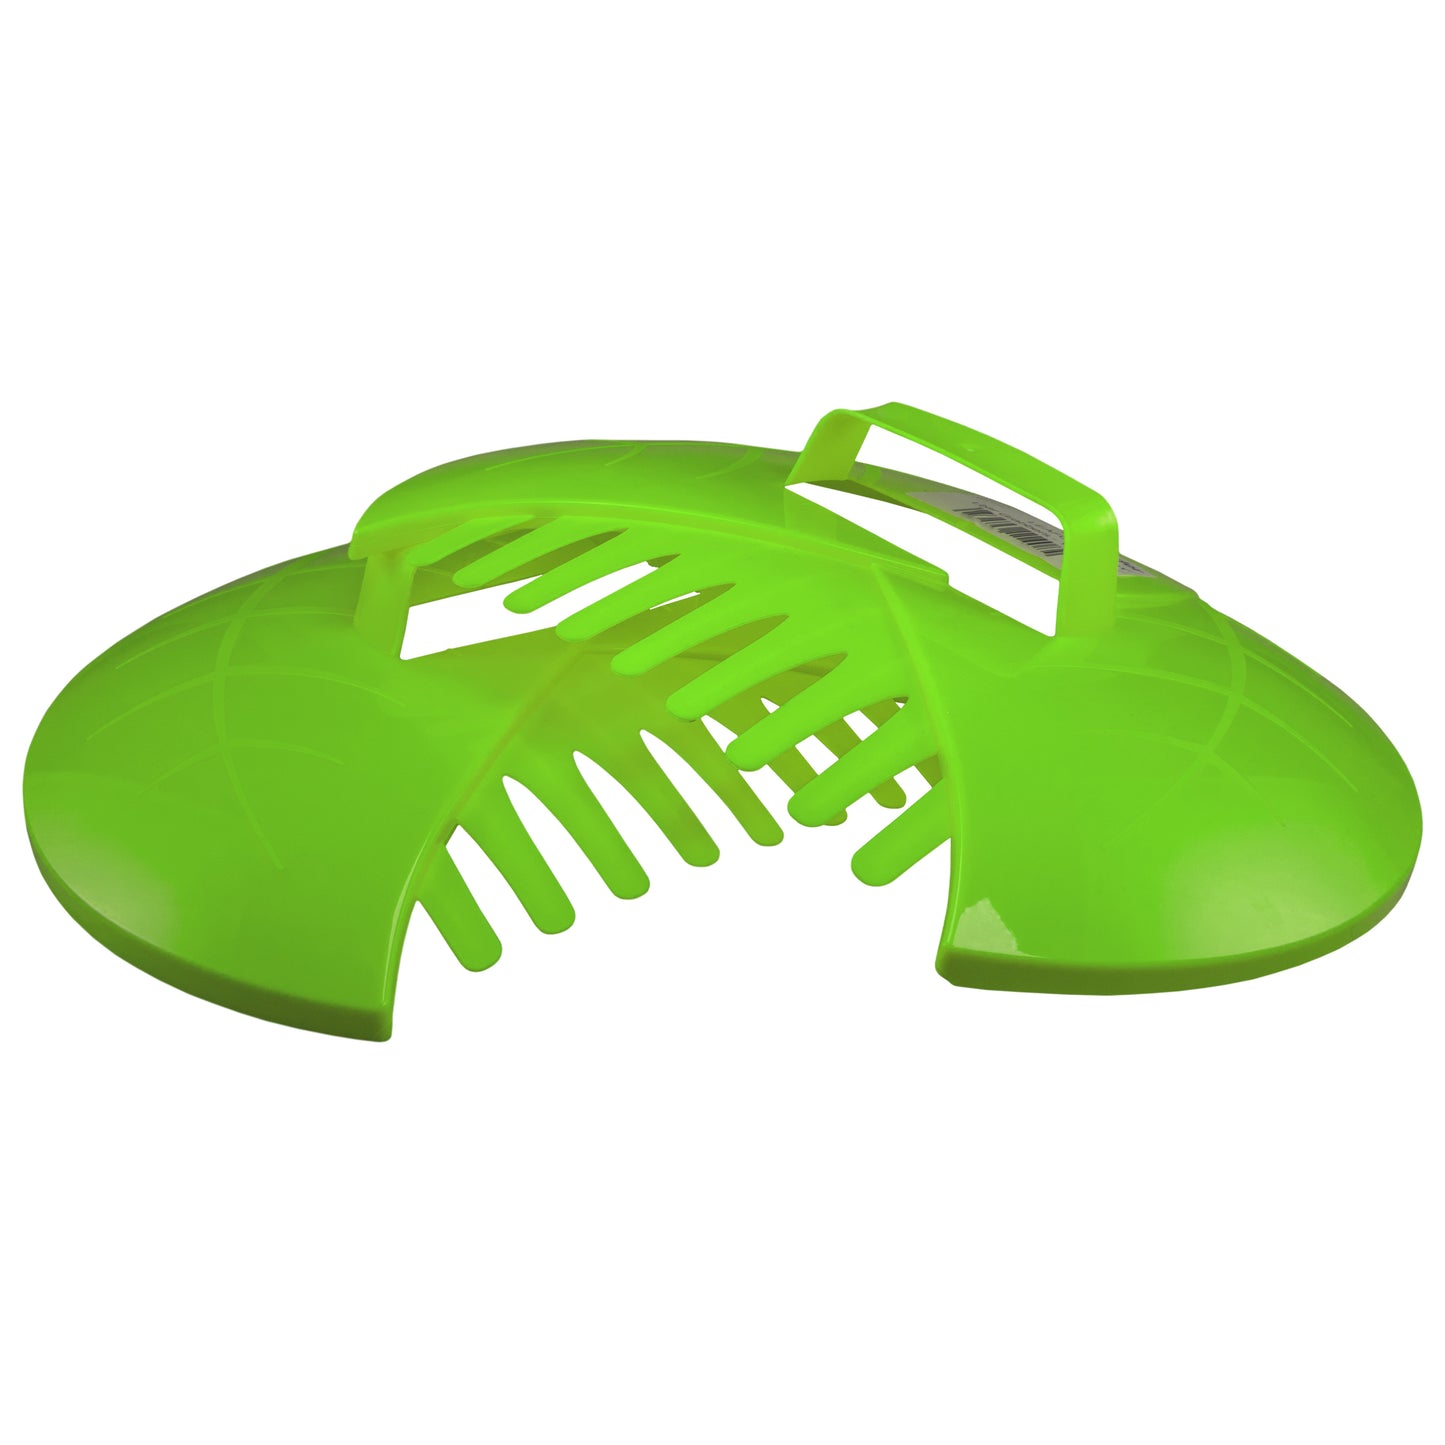 Leaf Grab Garden Cleaning Scoops, Green